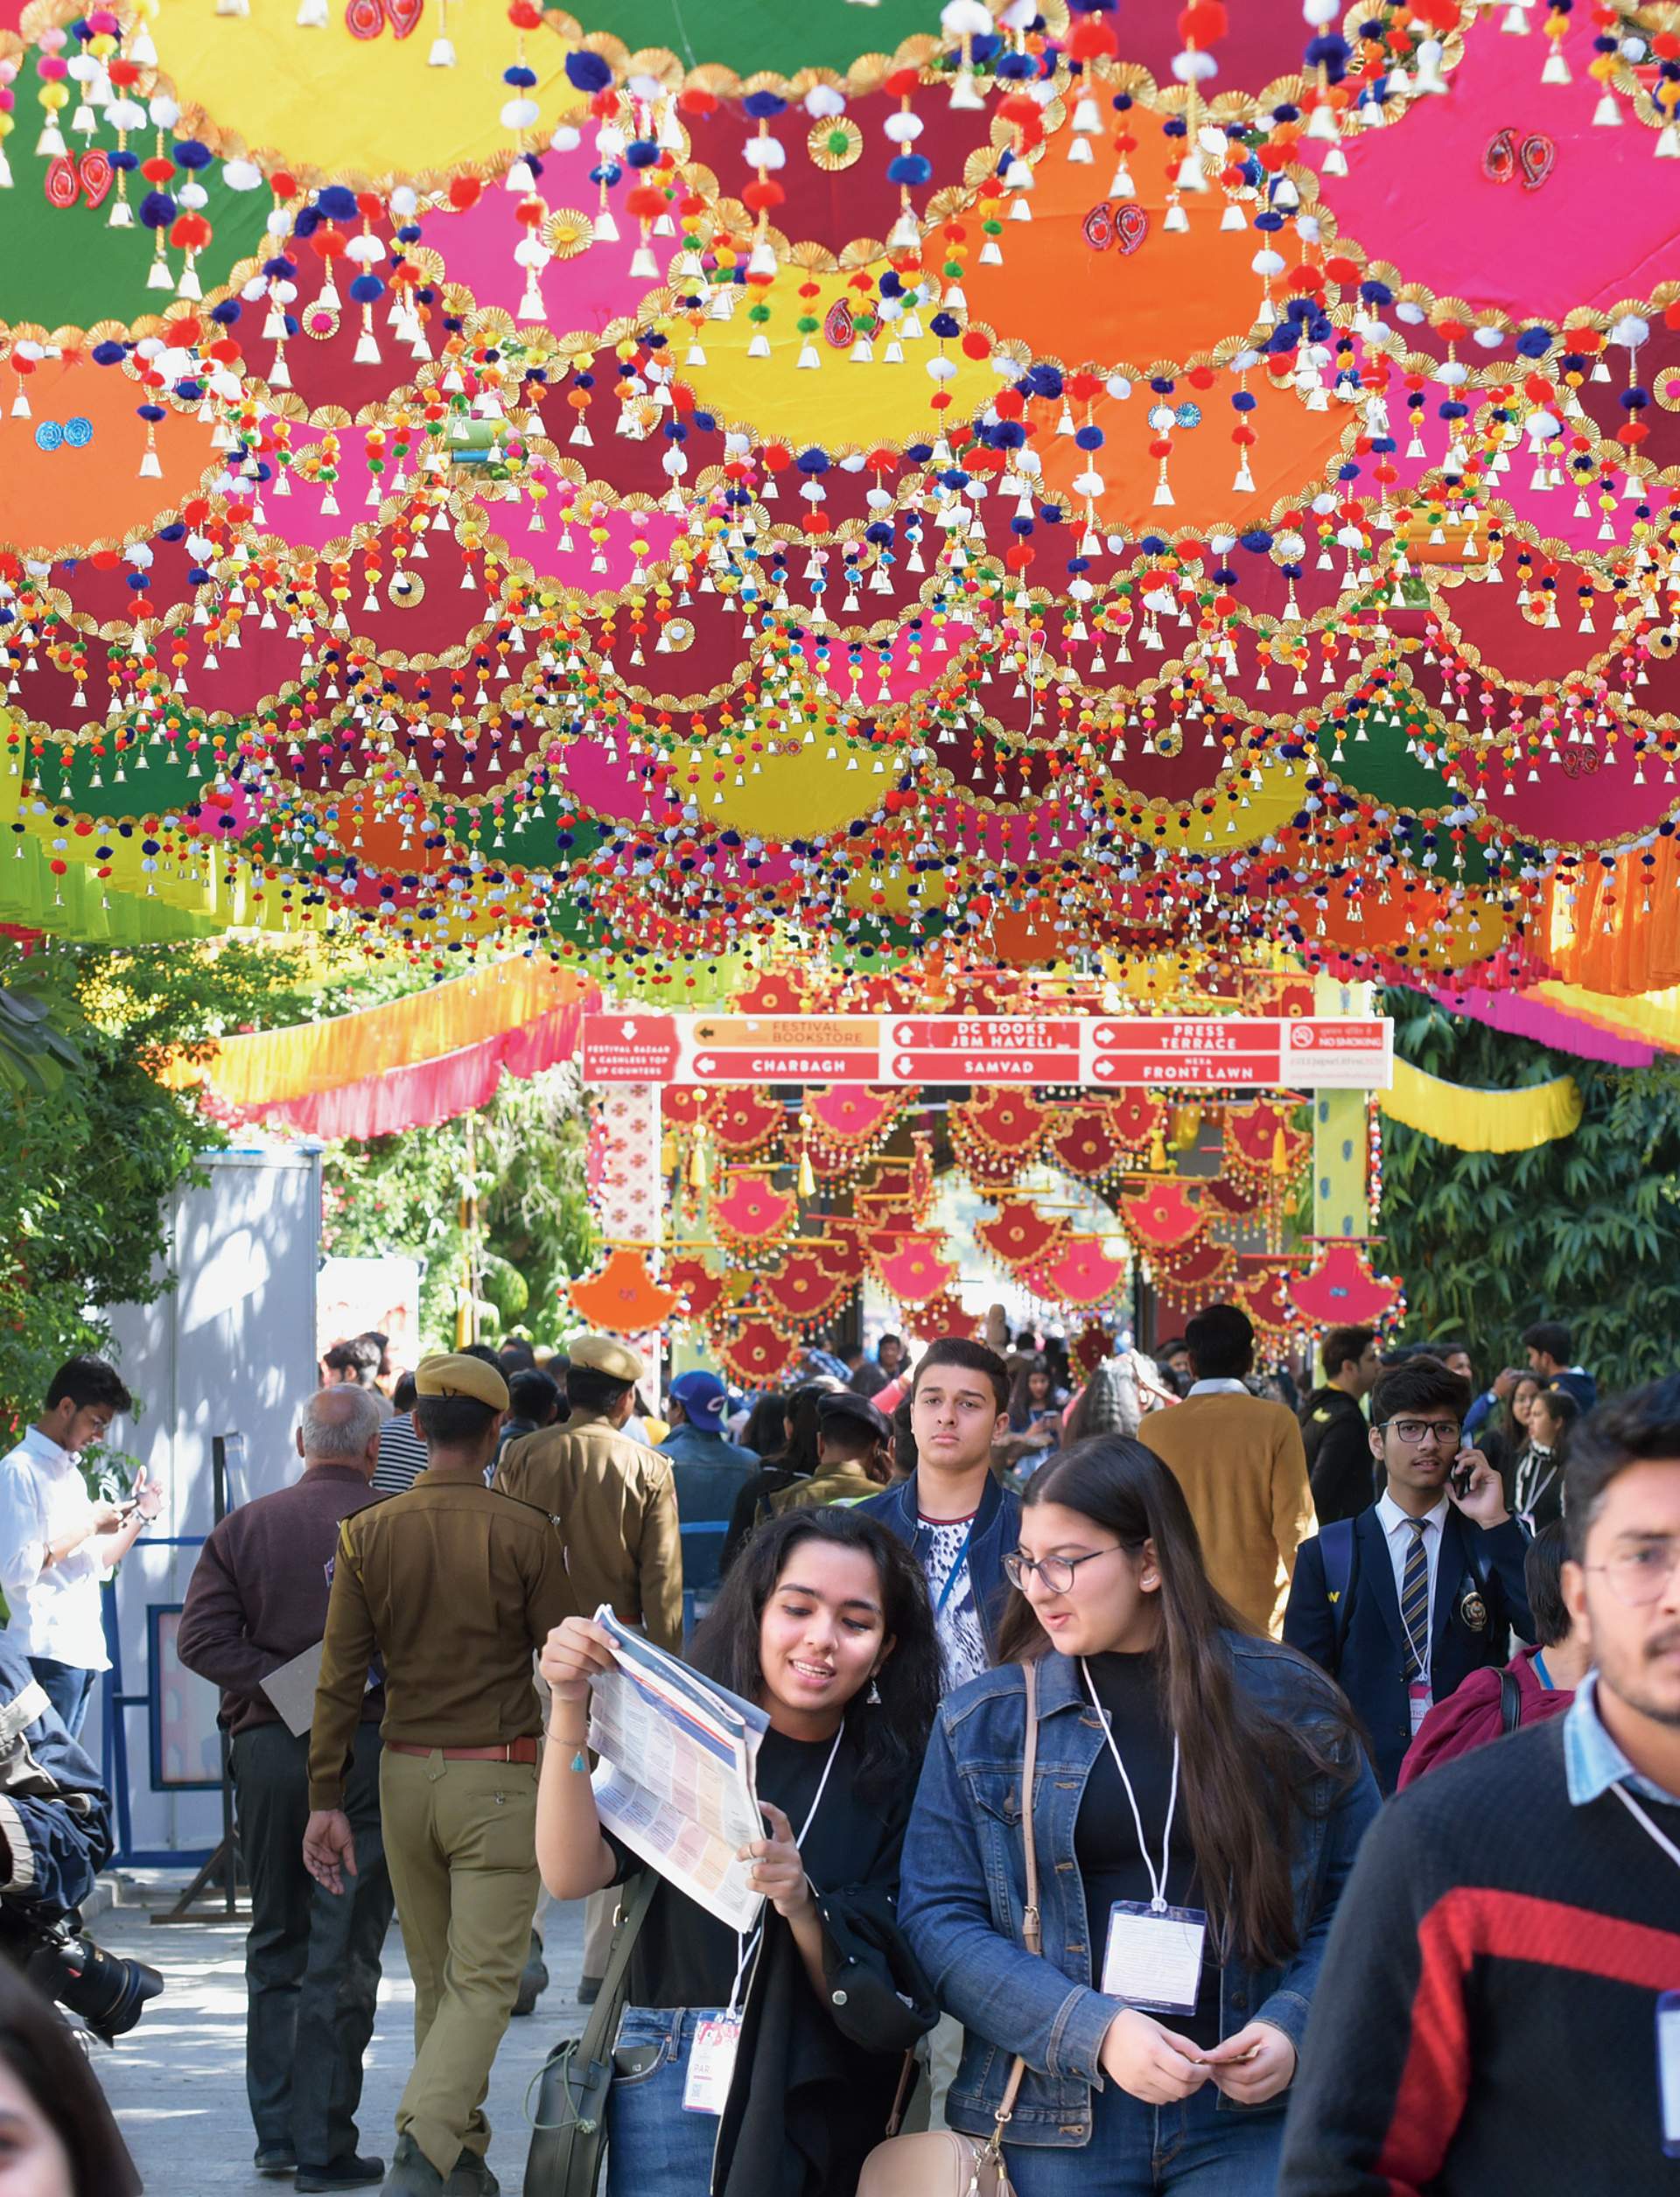 JAIPUR LITERATURE FESTIVAL 2022 THE MECCA FOR BIBLIOPHILES GOES GLOBAL